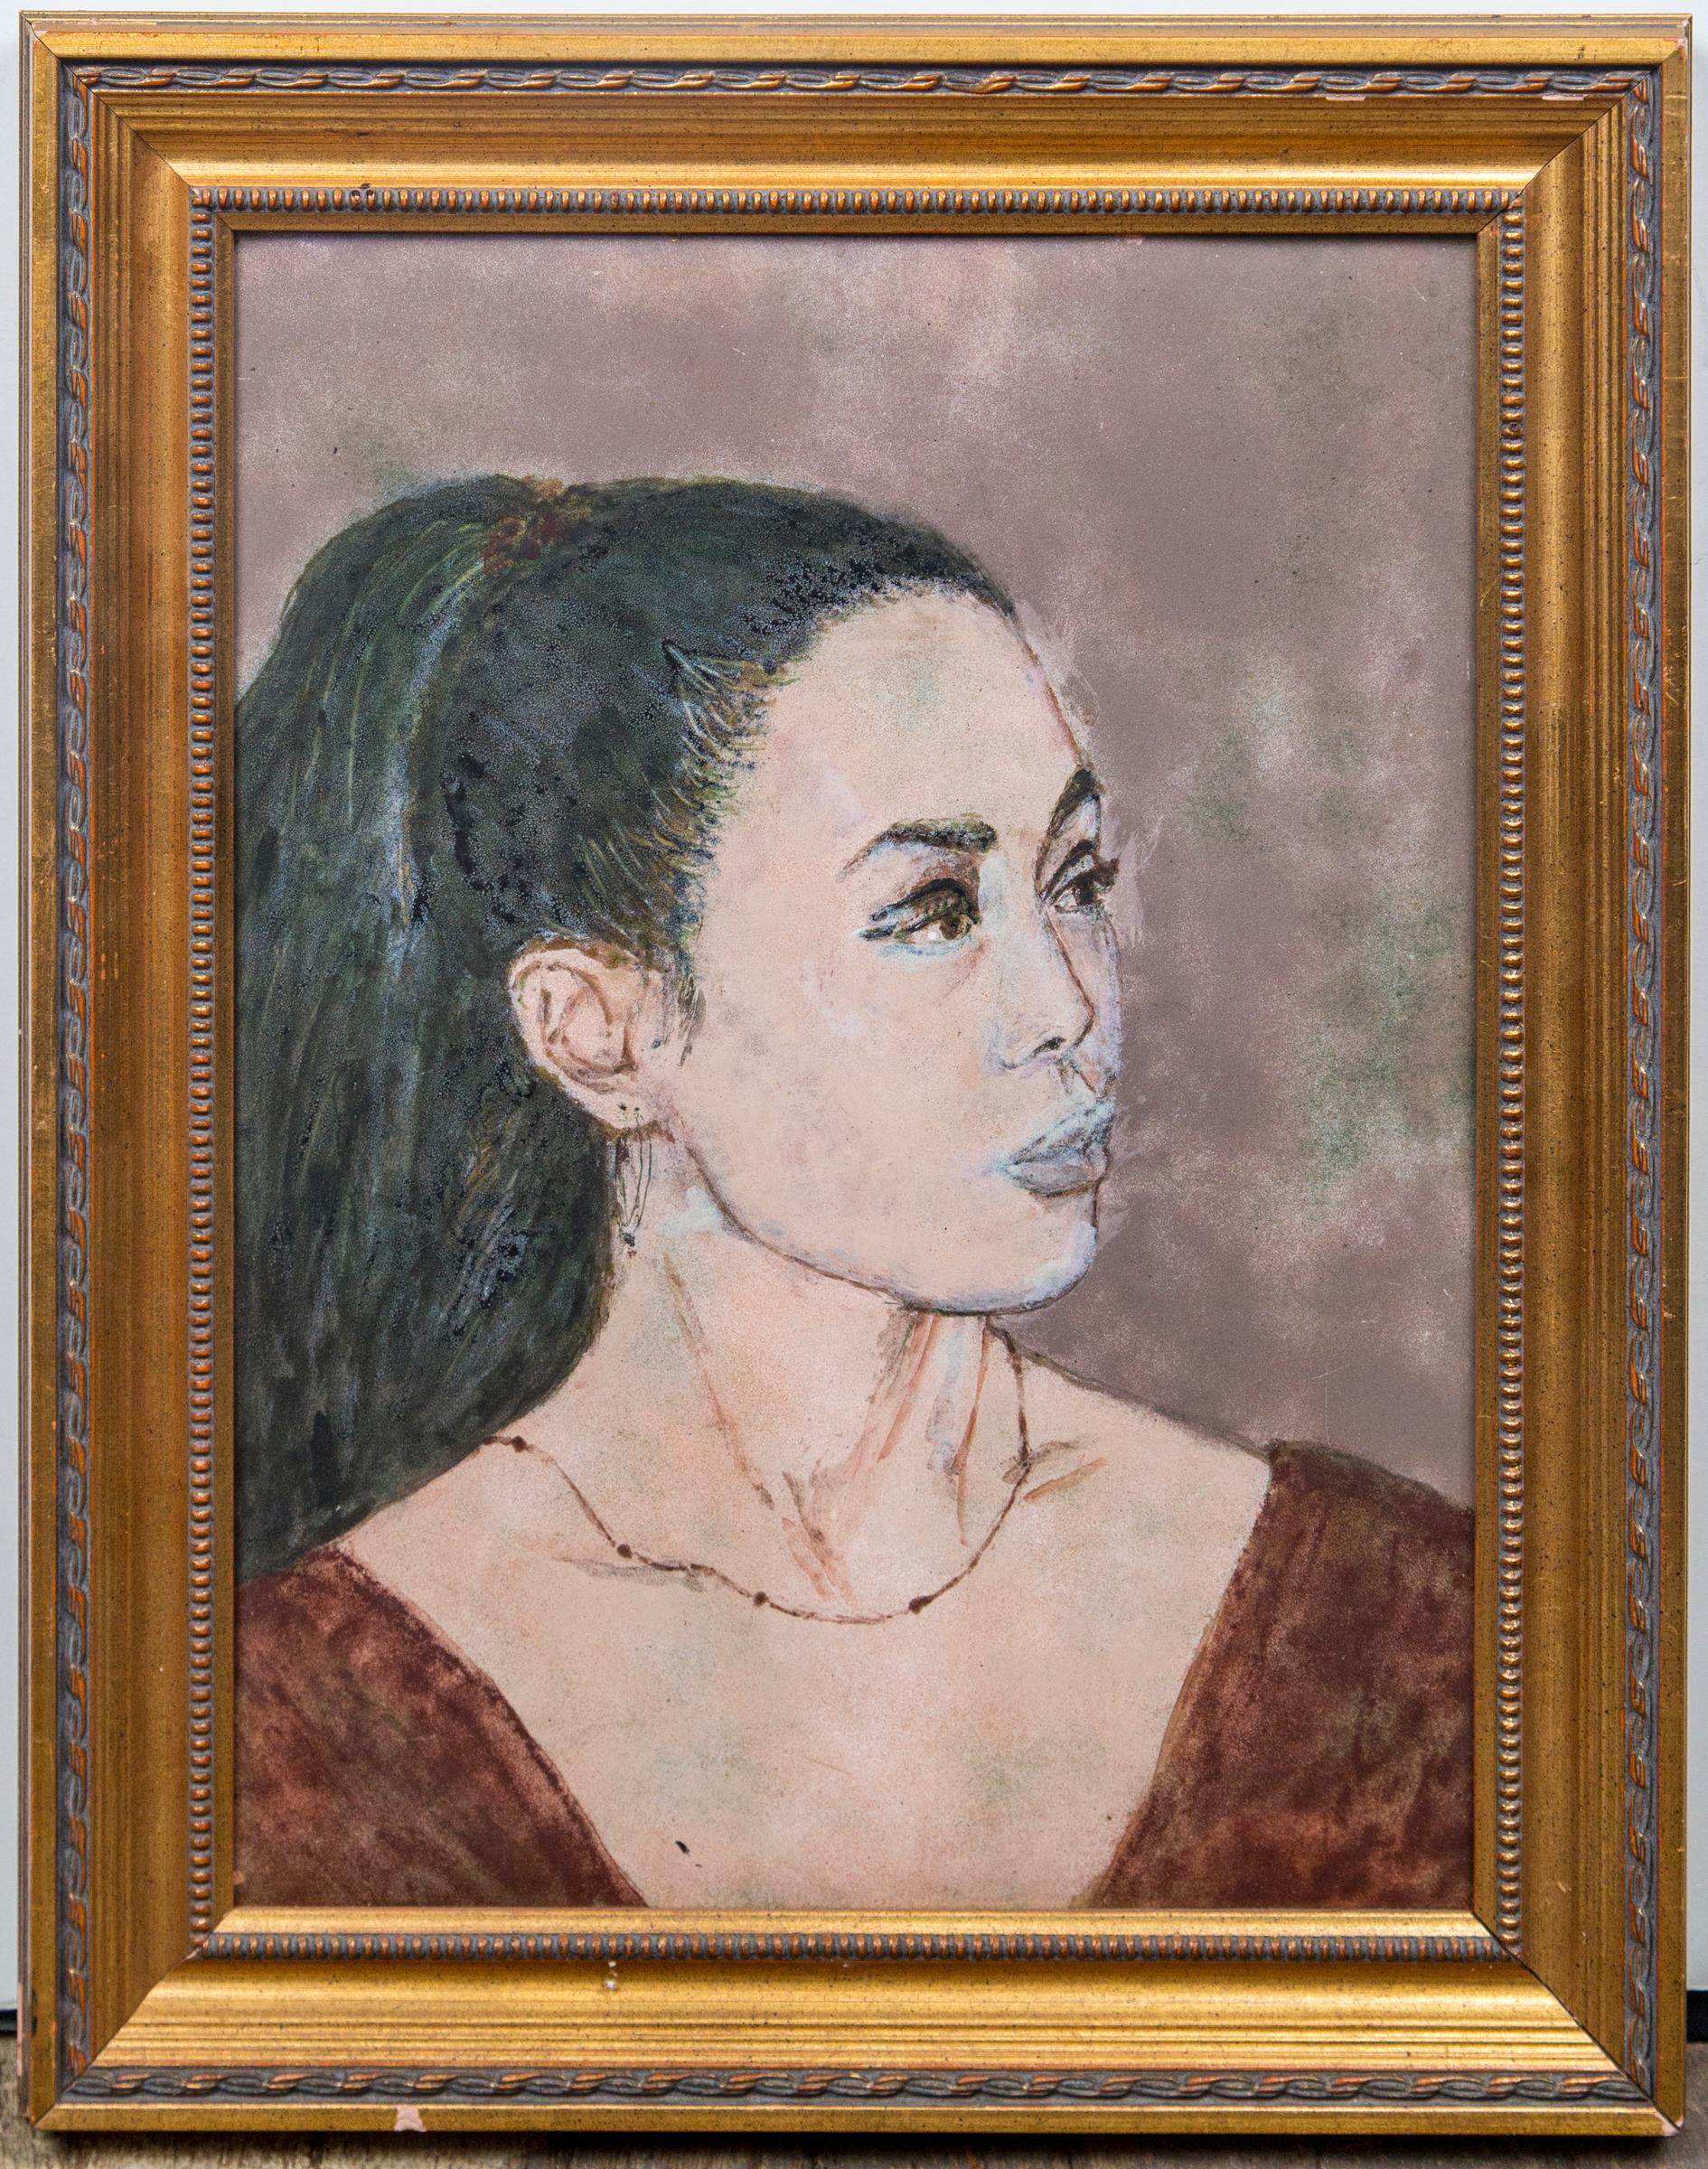 Mounted within a gilt wood frame, she poses. almost full face to the artist.
She wear a necklace with matching earrings.
Her long dark hair pulled back.
Unsigned
Not examined out of frame.